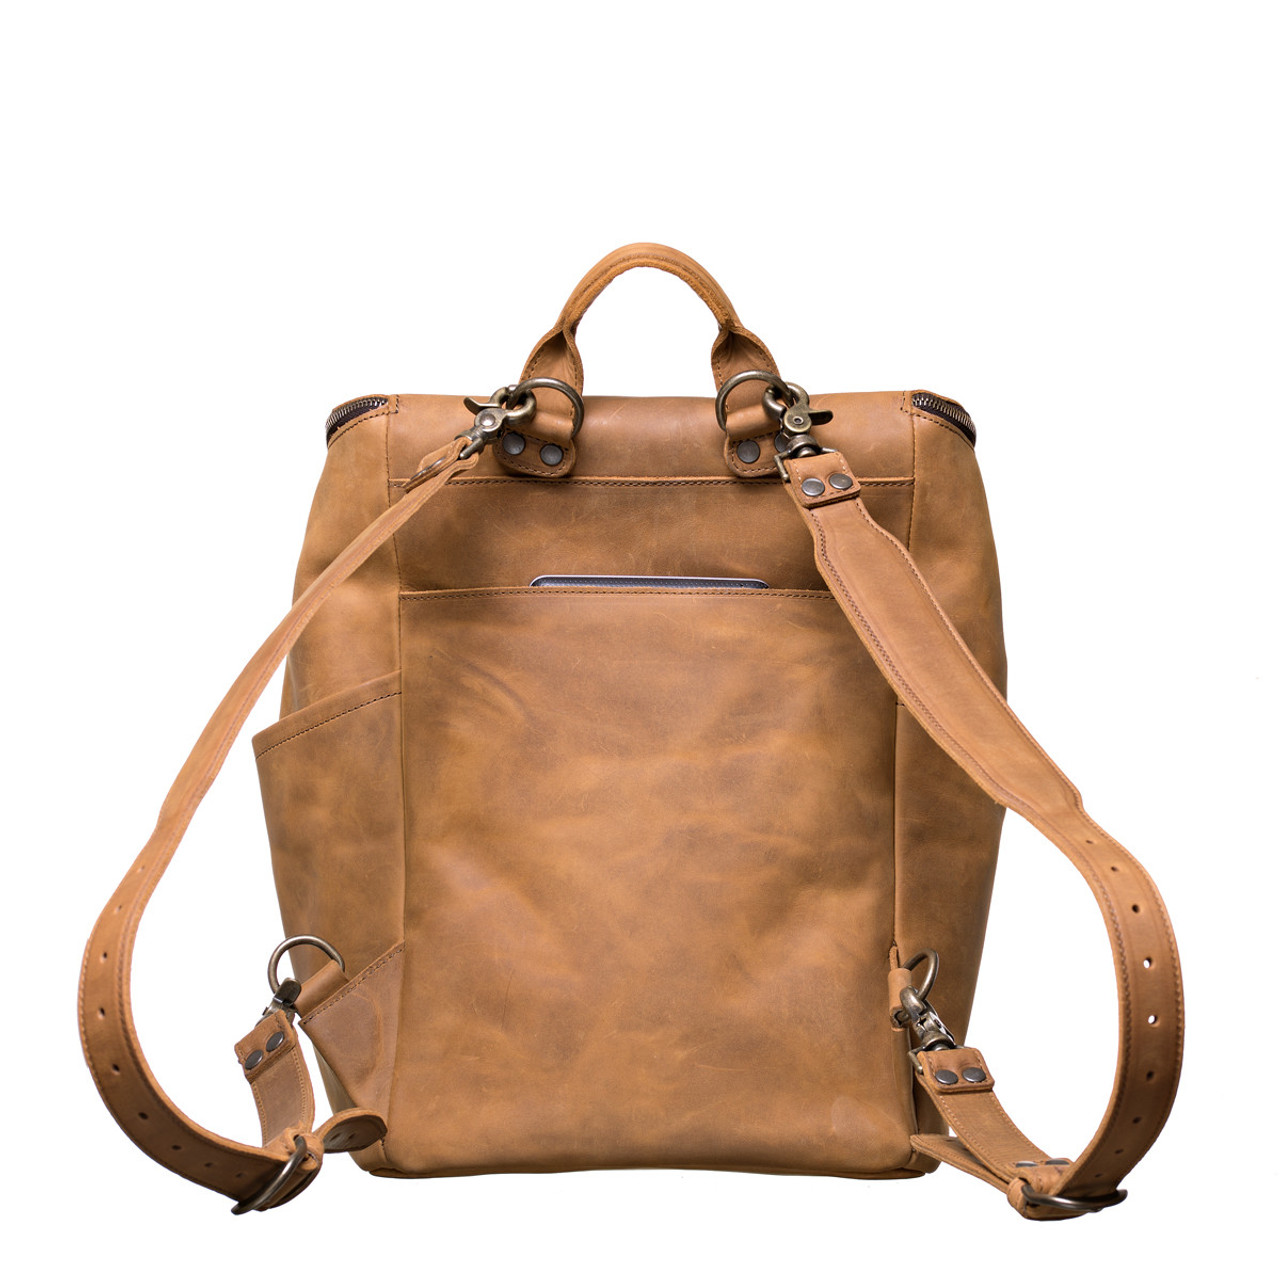 New arrival medium size backpack leather stuff with high quality